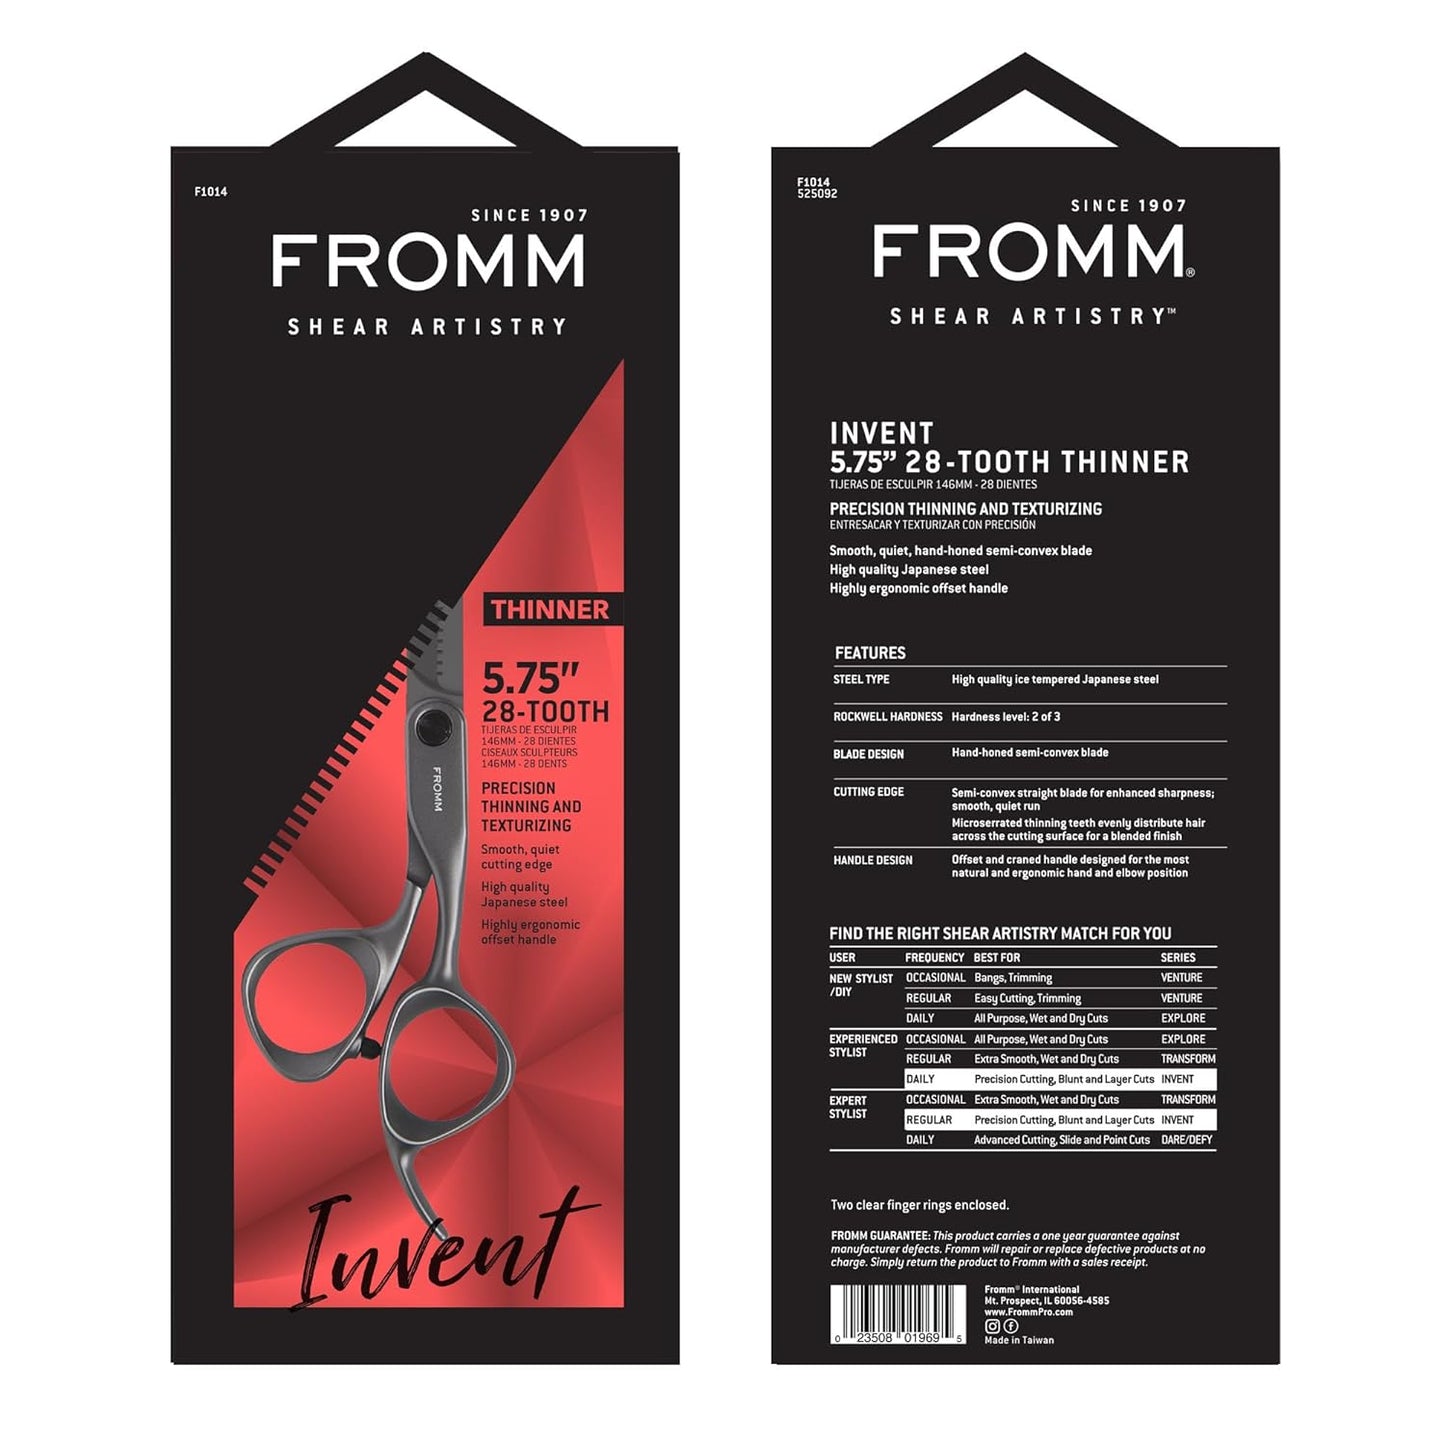 Fromm Professional Invent 5.75" 28-Tooth Precision Hair Thinning & Texturizing Shears for Blunt & Layer Cuts in Gunmetal Japanese Steel Scissors with Semi-Convex Blade for Salon Stylists